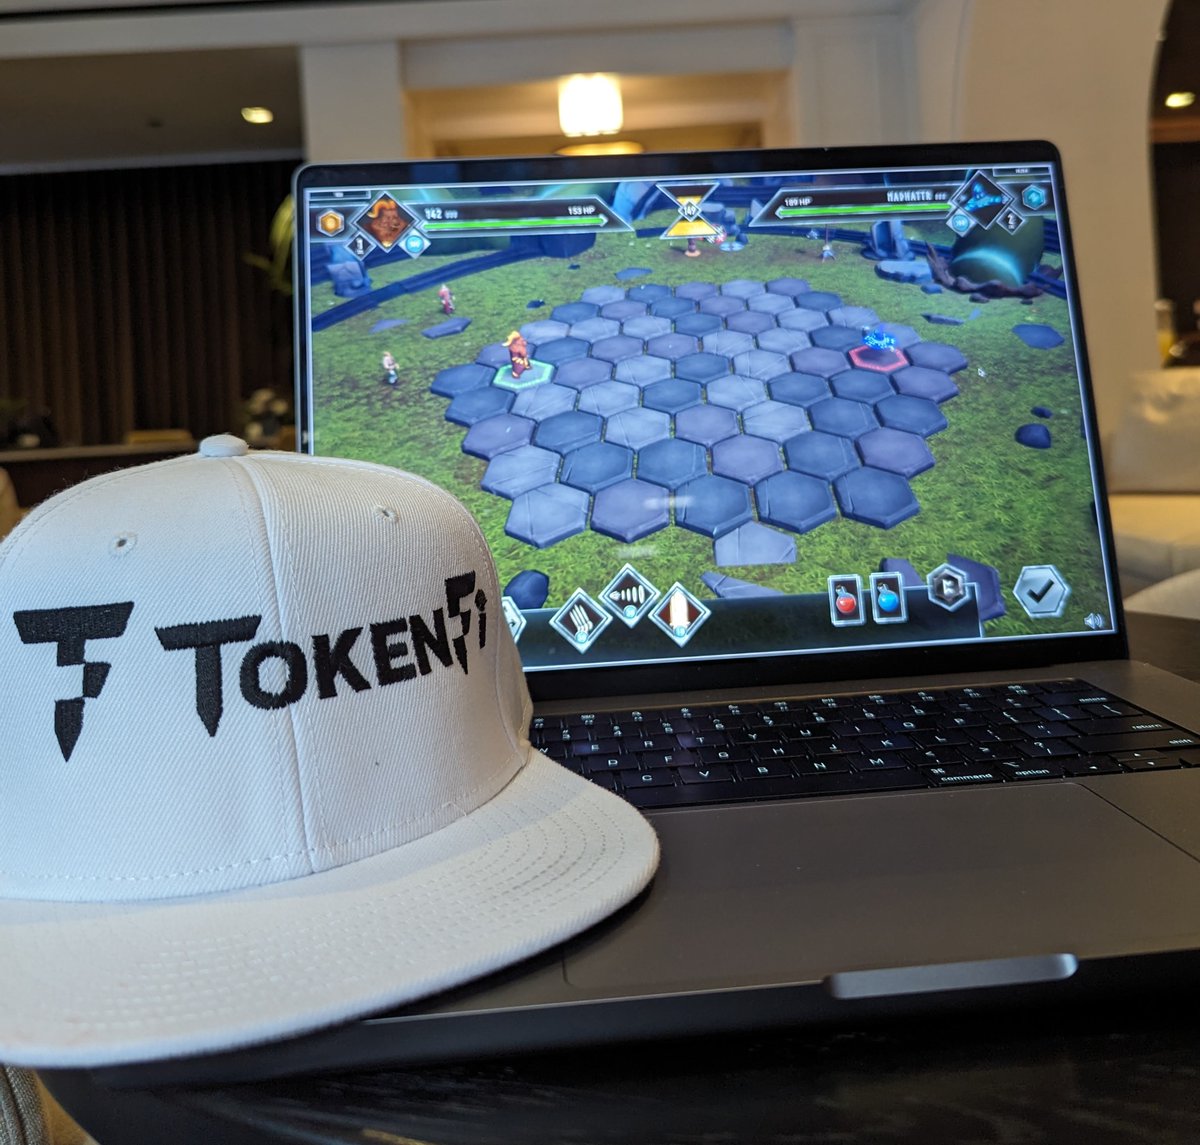 Happy Sunday, Vikings! The #FLOKI team never rests, here we are testing the epic #VALHALLA patch release! 🔥 And hey, check out the sneak peek of the #TokenFi cap we're toying with!?🧢 Should we release it soon? 🚀 Share your Floki merch - tag us! ⚔️ shopfloki.com